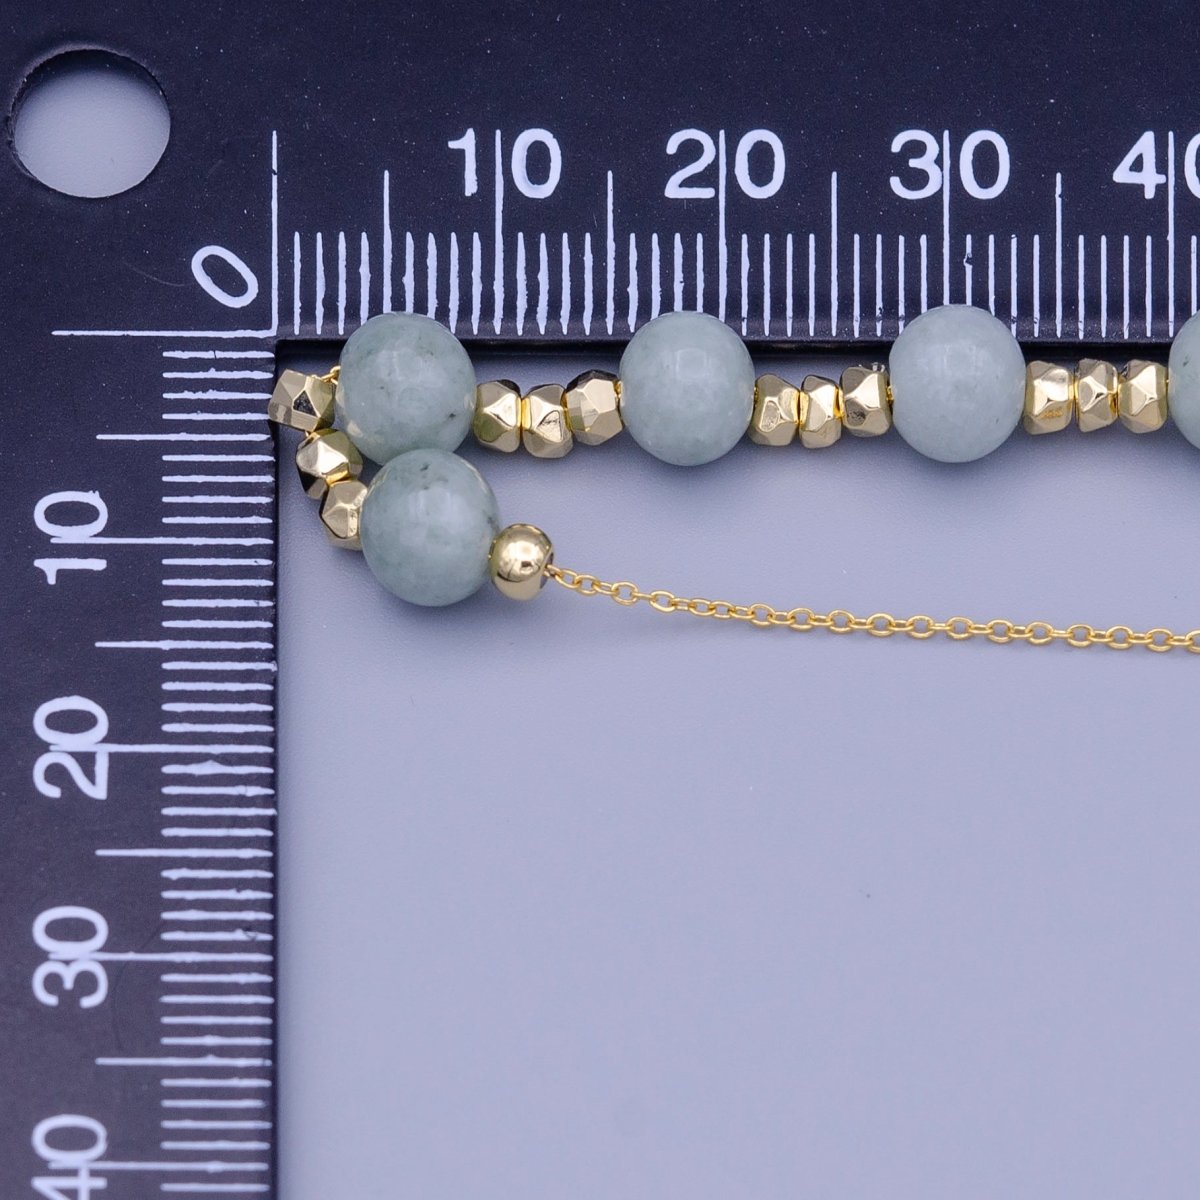 24K Gold Filled Multi Tone Green Aventurine Gemstone w. Cube Spacer Beads Adjustable Cable 18.5 Inch Chain | WA-1452 Clearance Pricing - DLUXCA